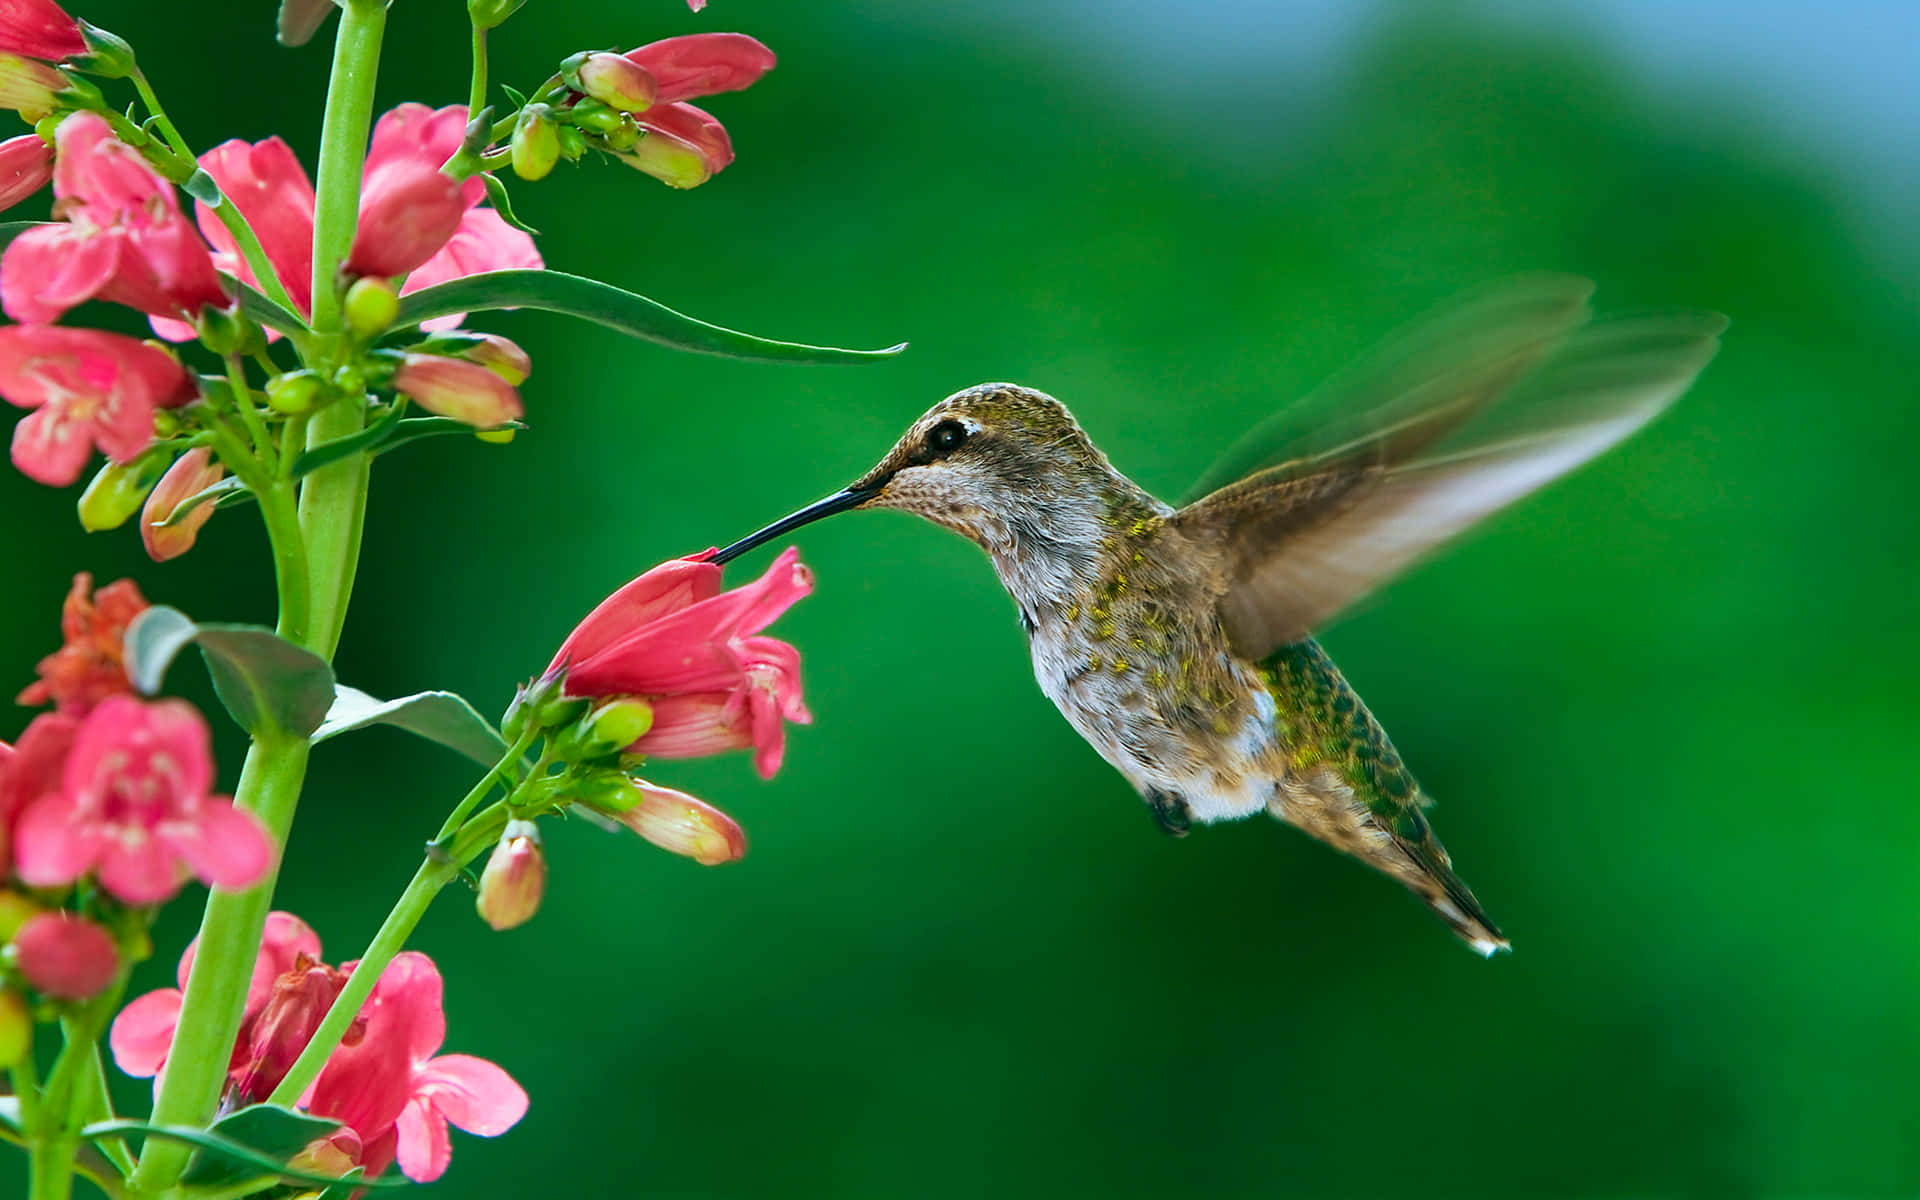 A Hummingbird Is Flying Over A Pink Flower